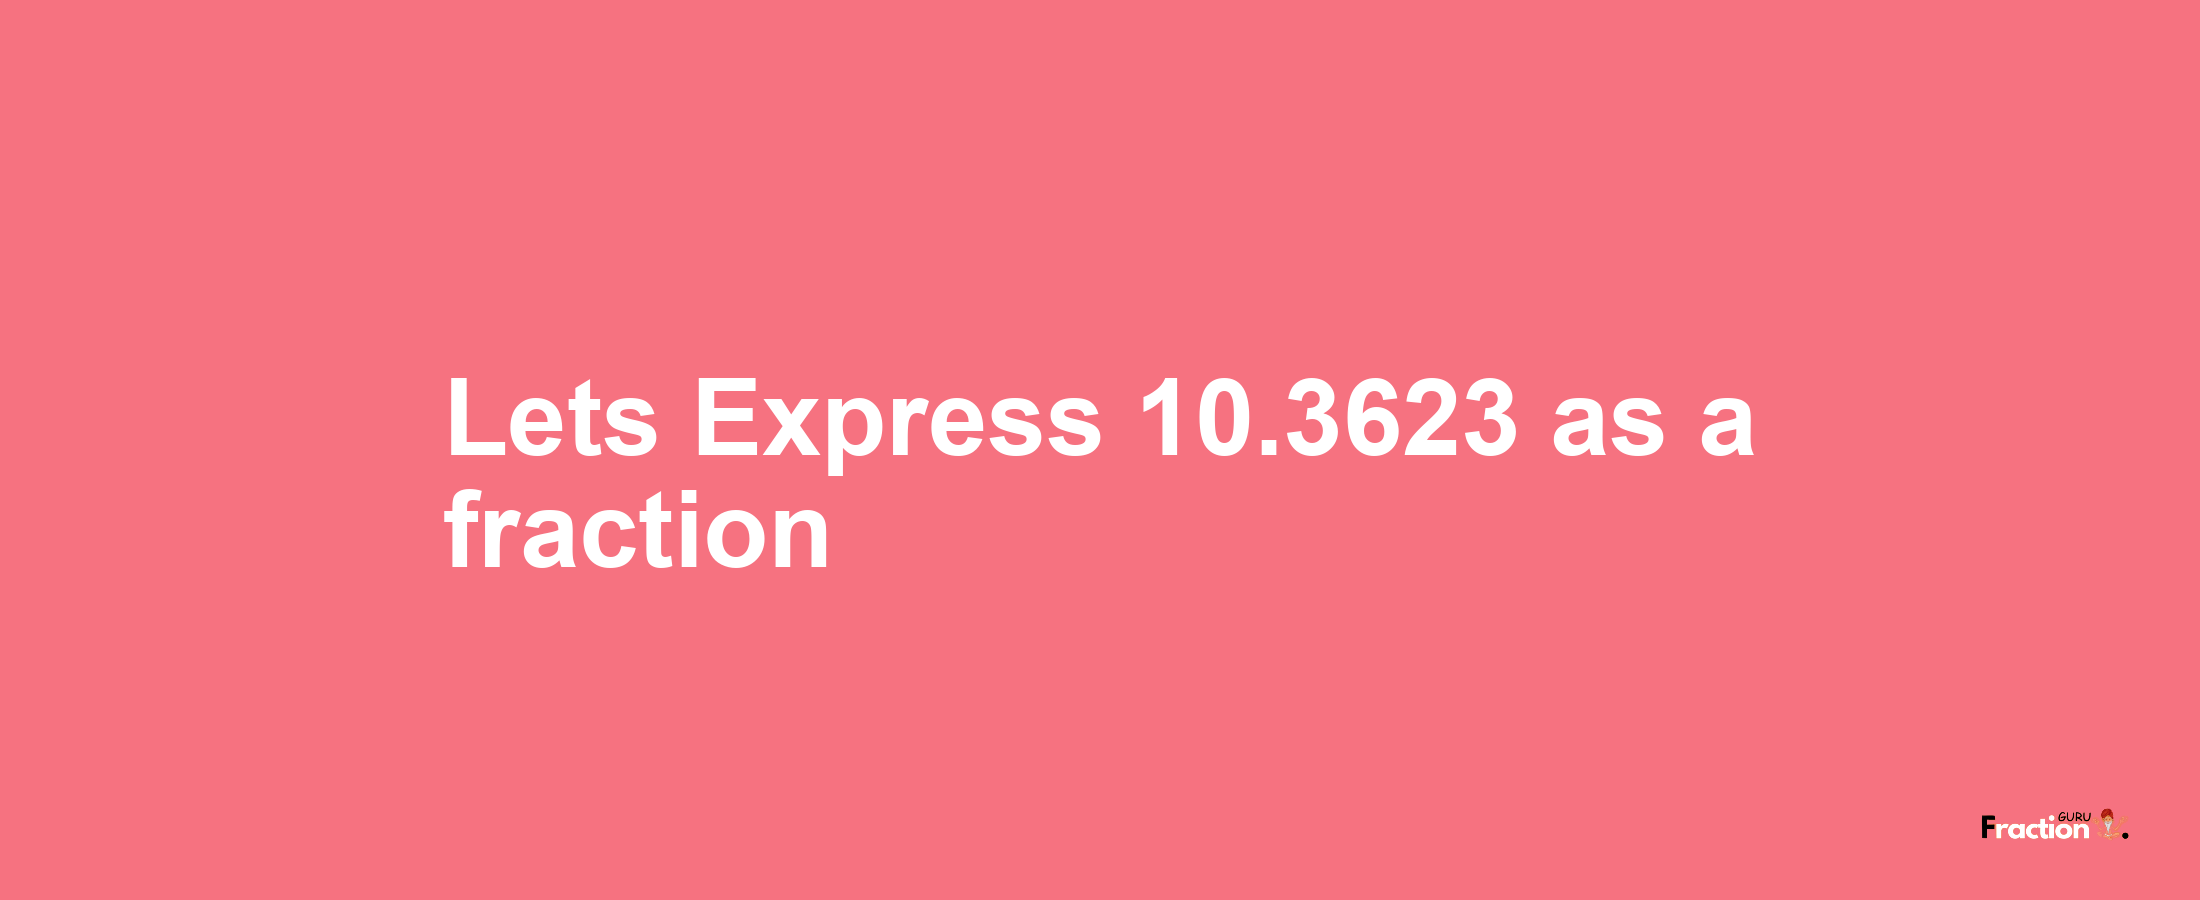 Lets Express 10.3623 as afraction